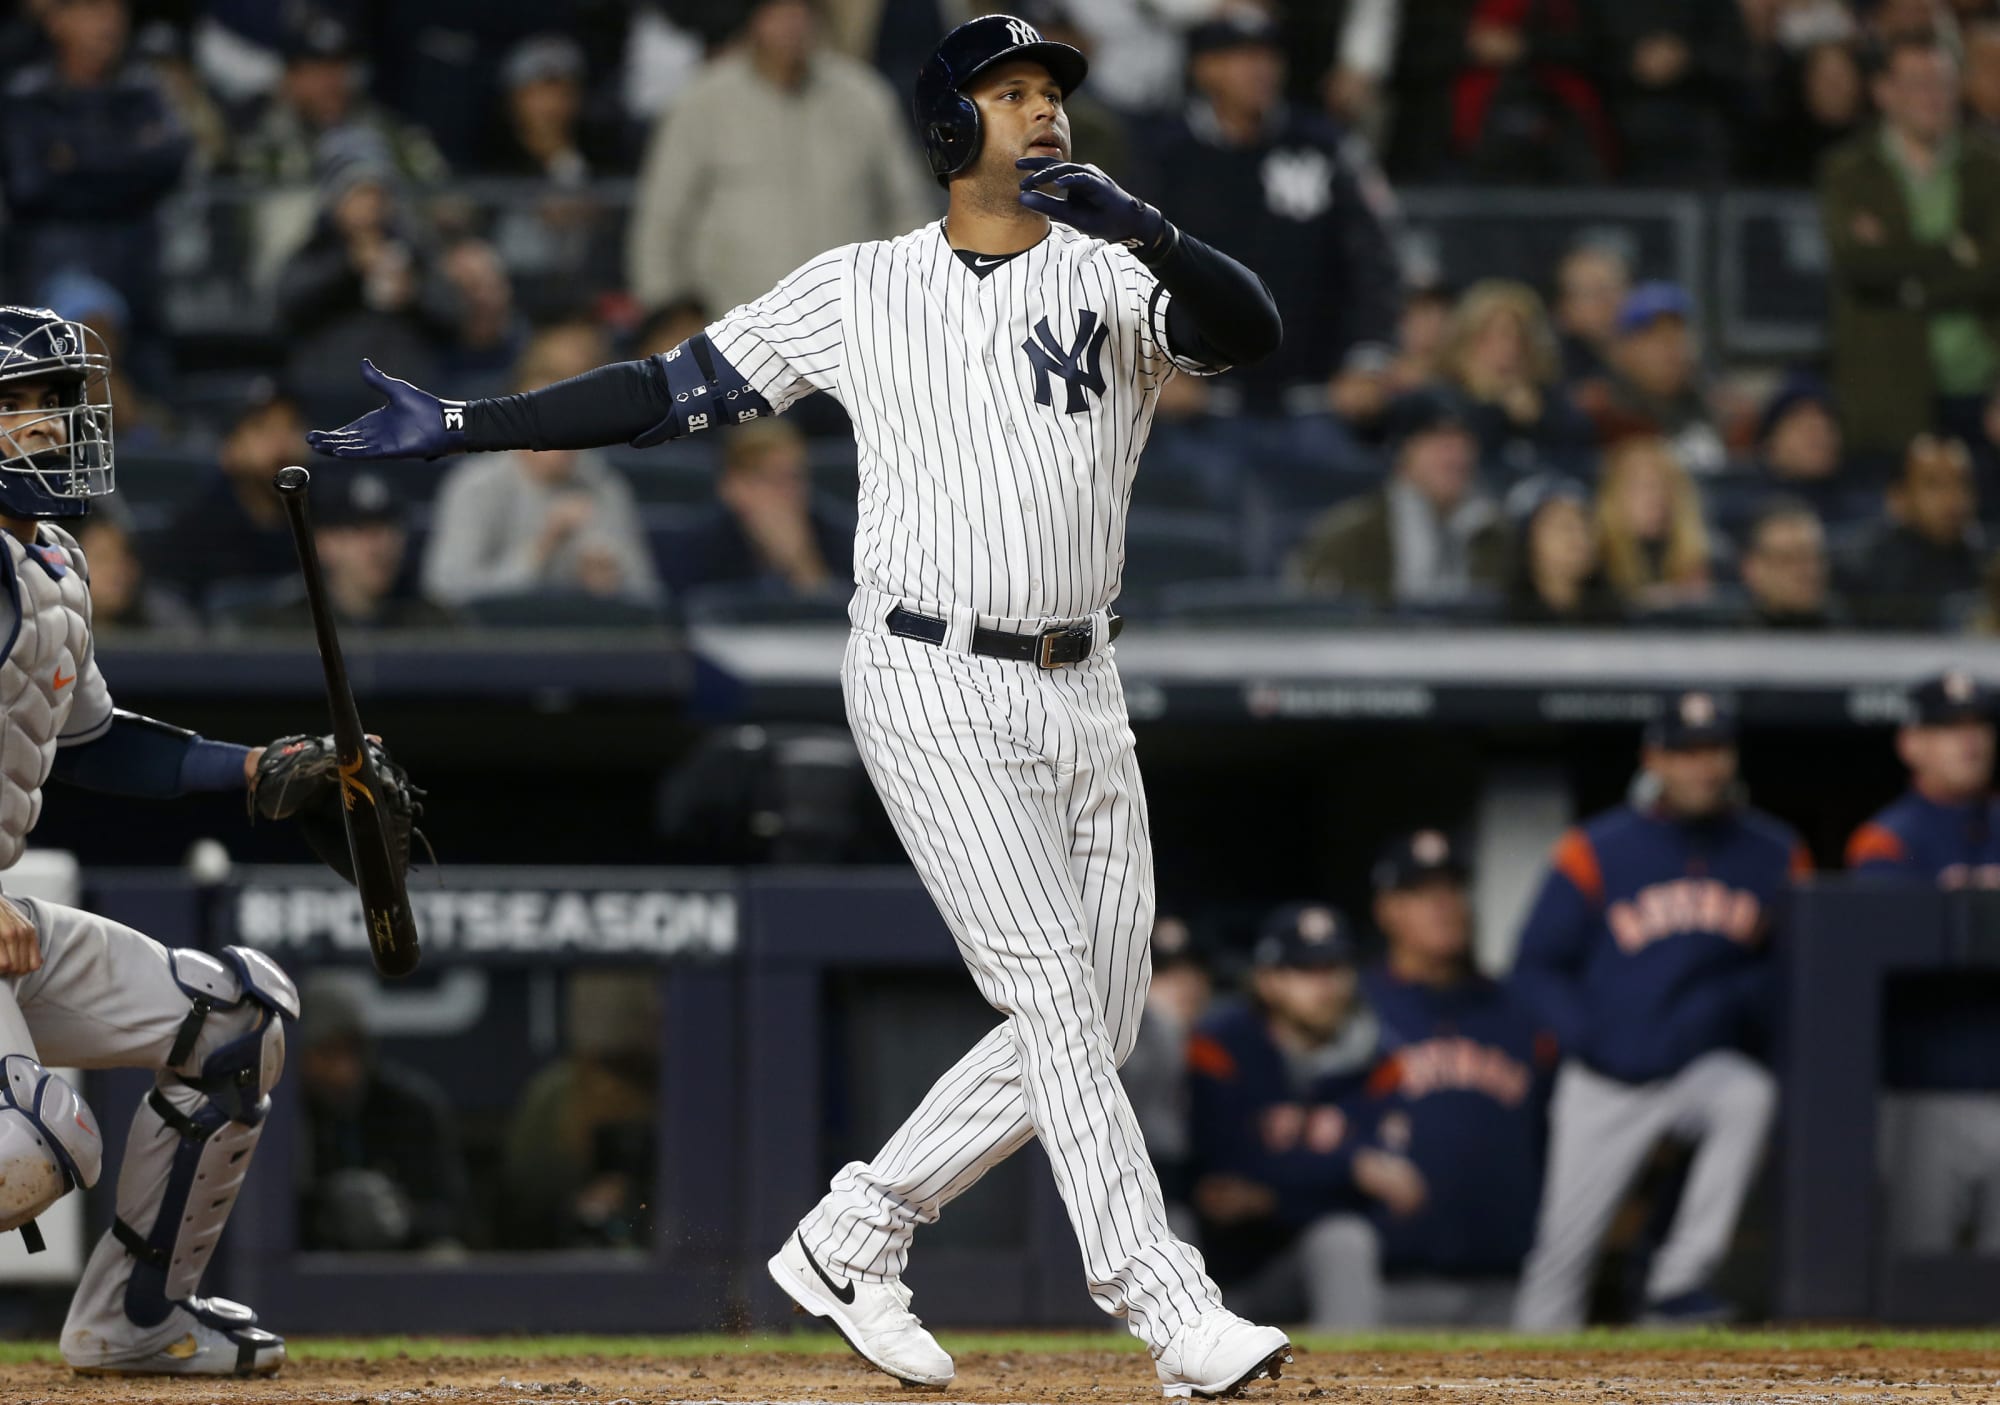 Yankees: Aaron Hicks Looks Ready to Go in Latest BP Video